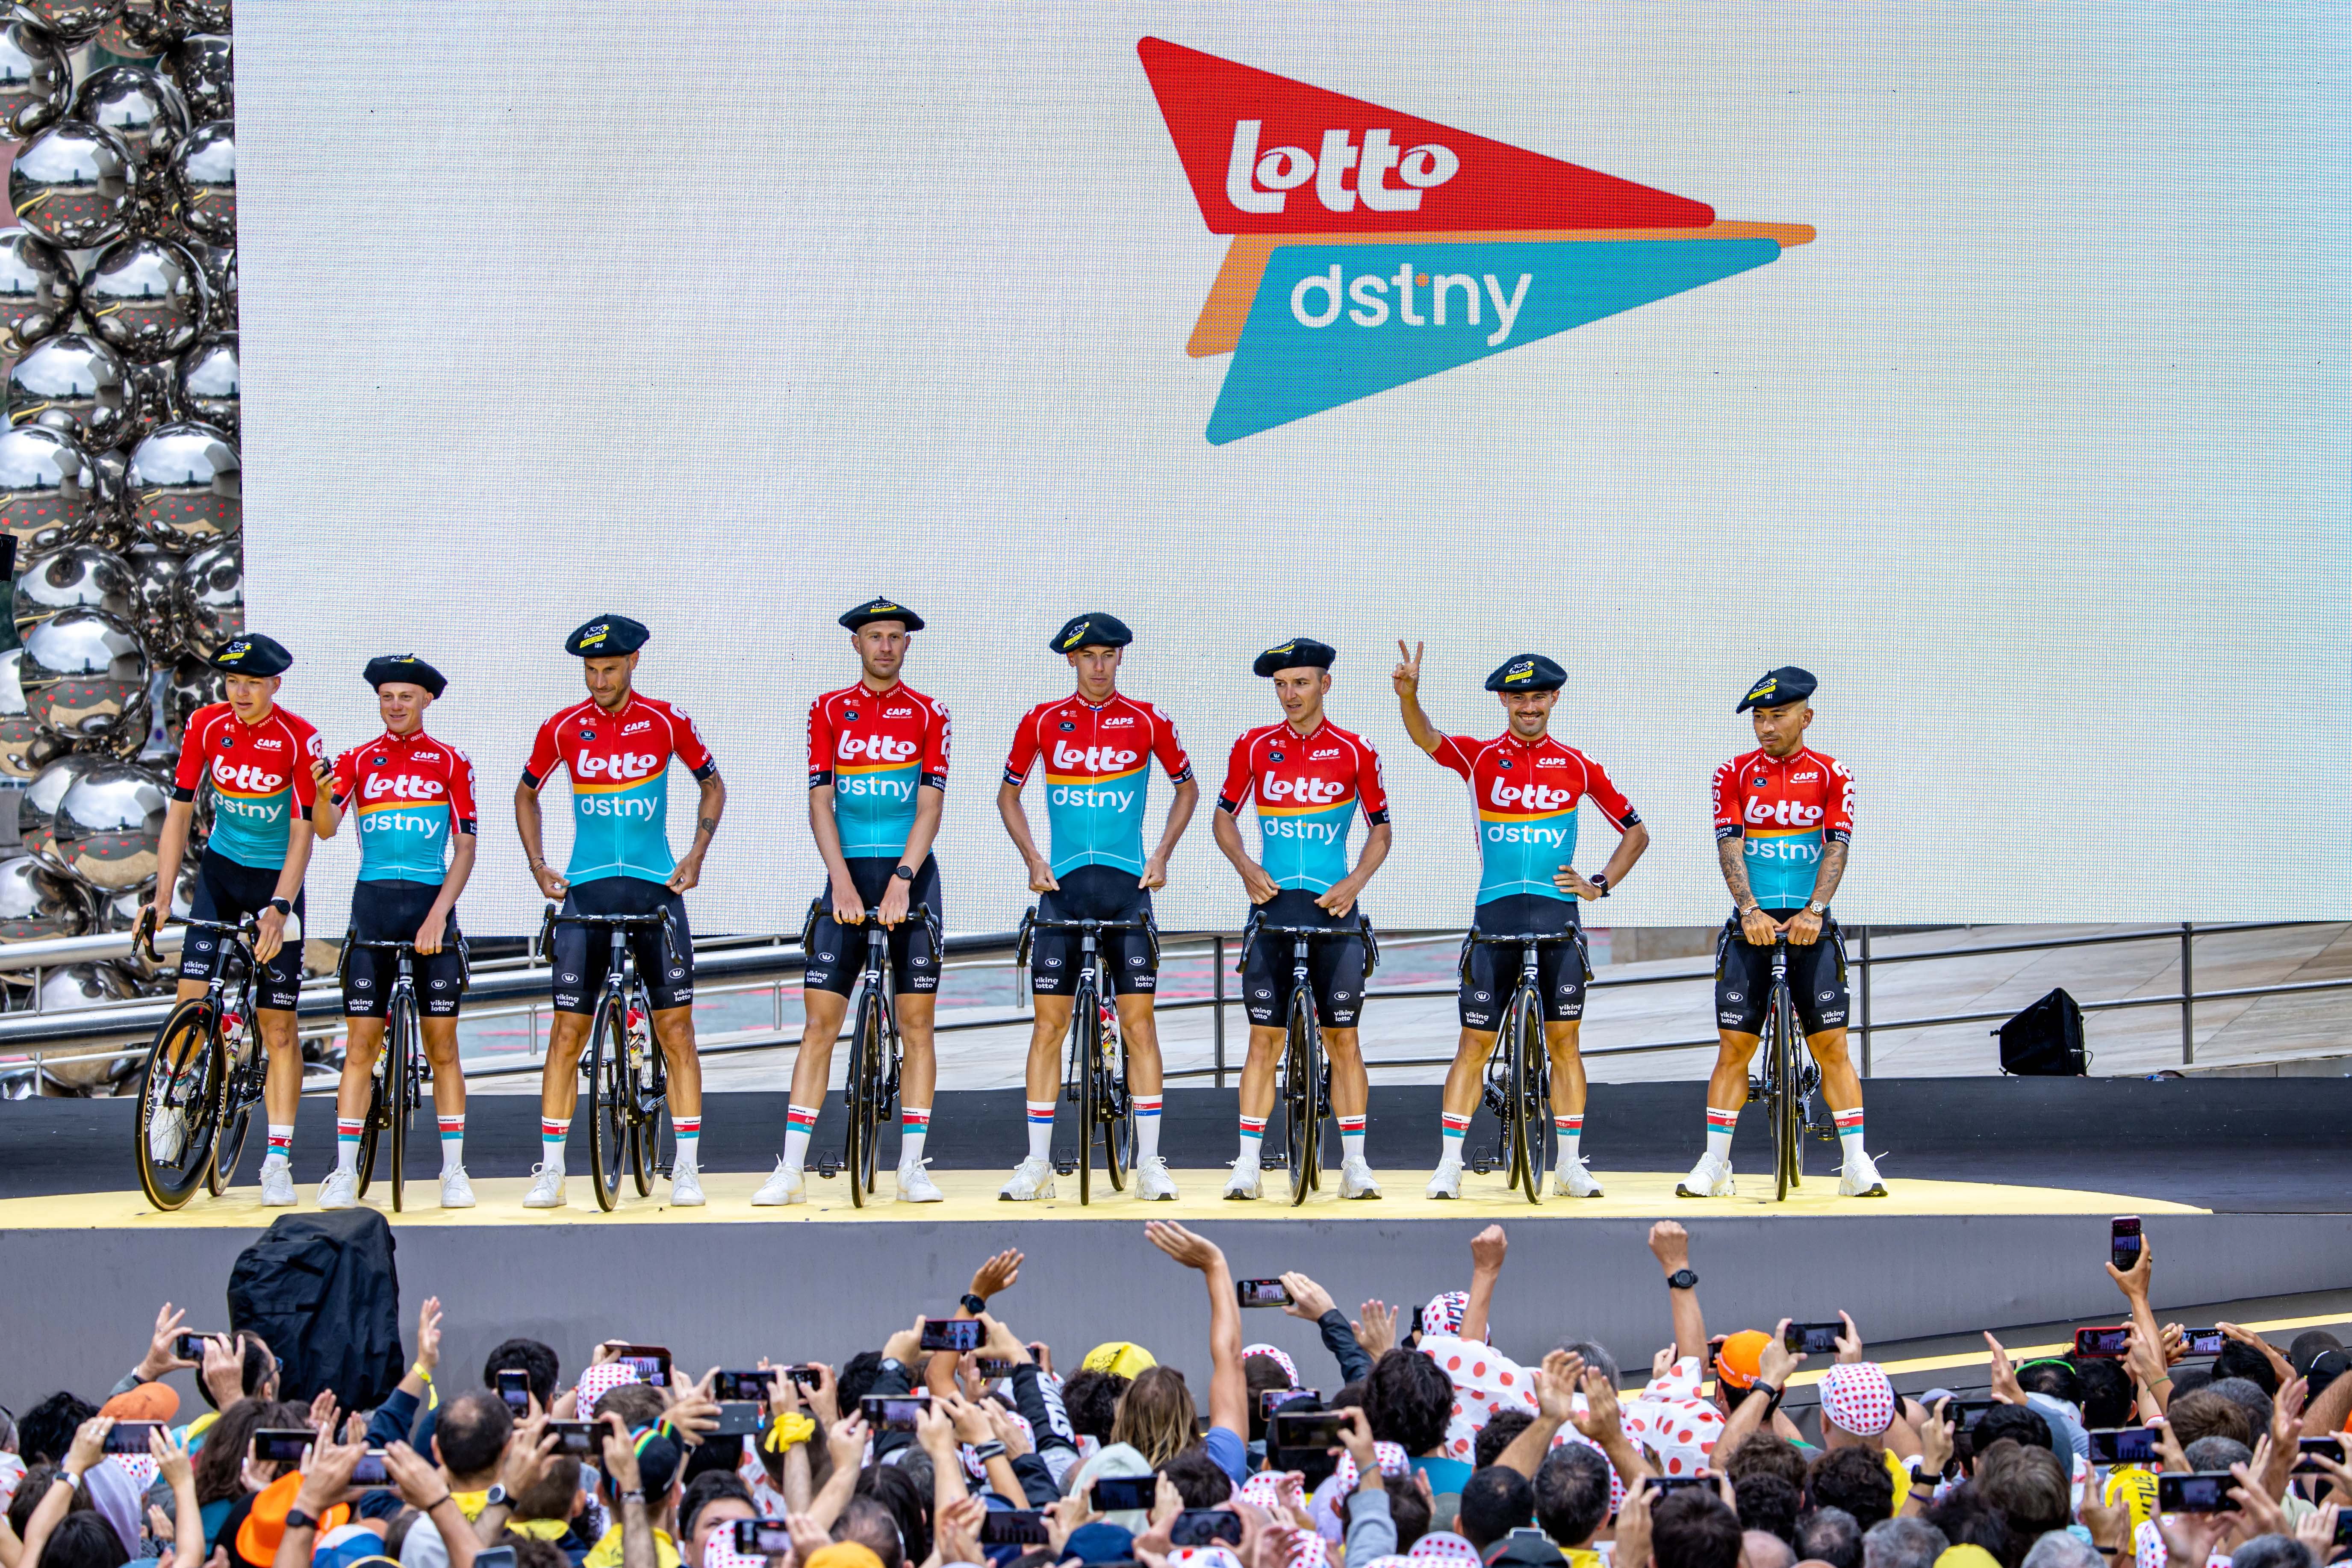 Lotto Dstny will be without sporting director Allan Davis at the Tour